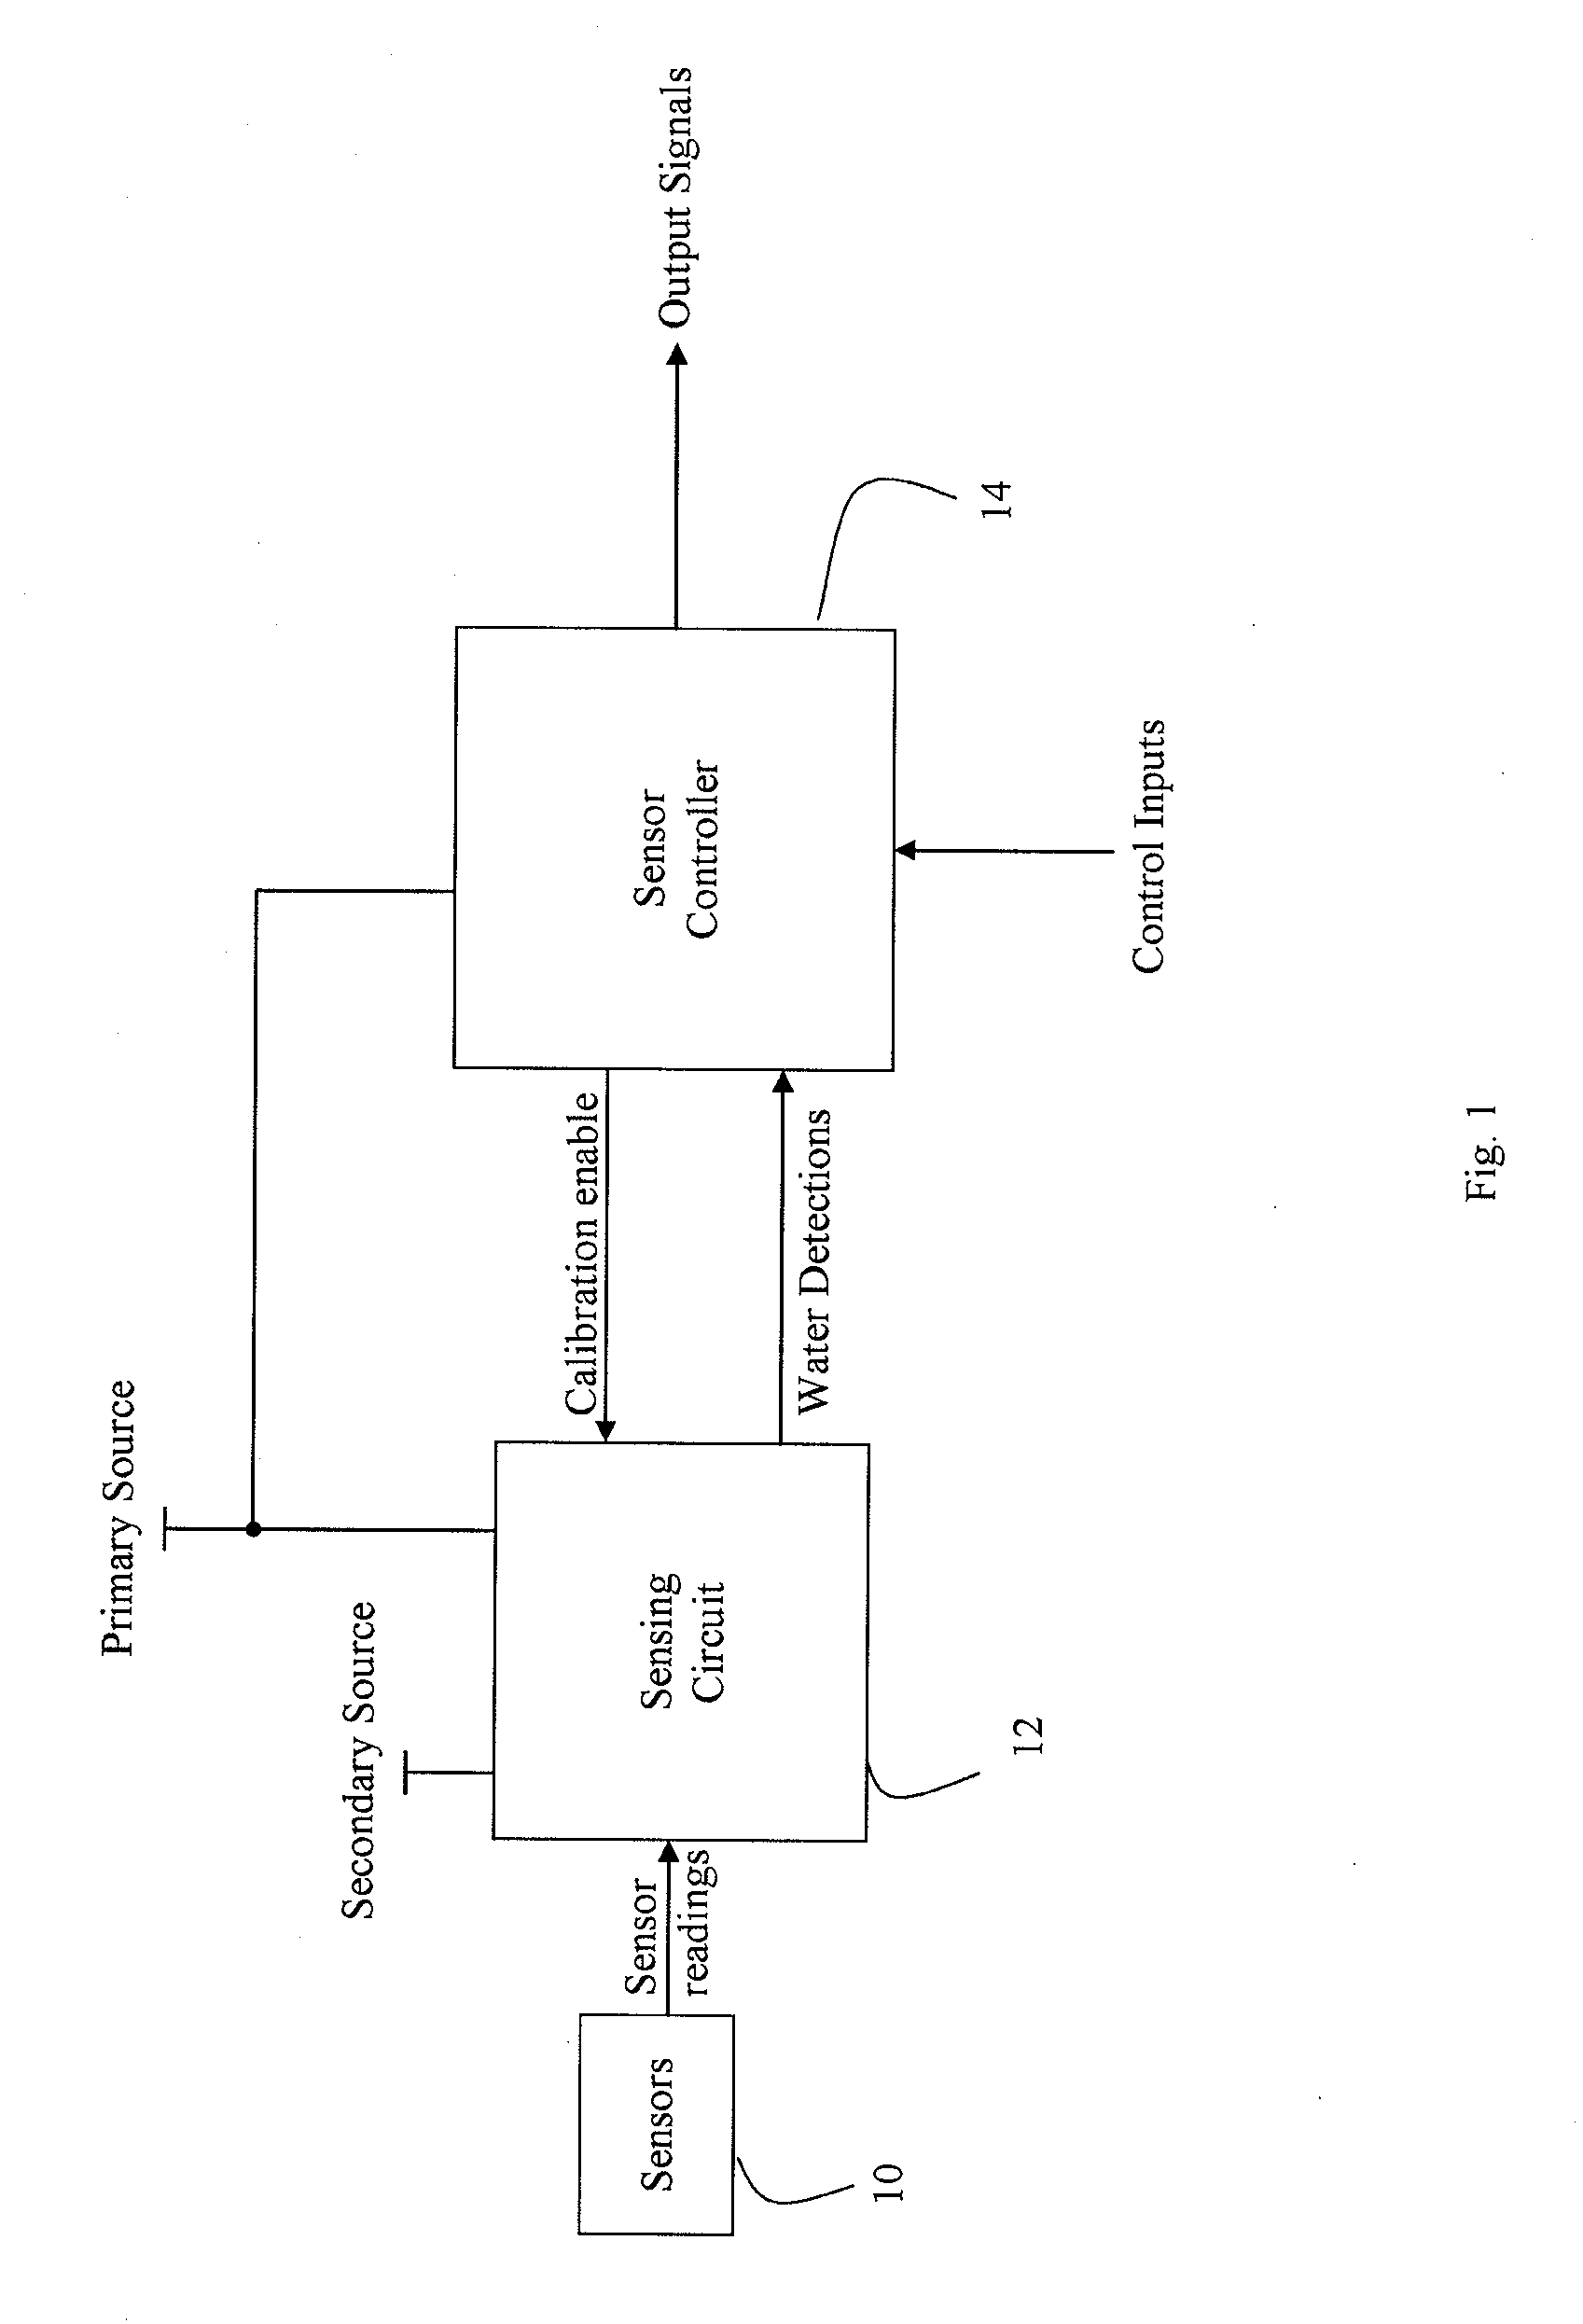 Method and apparatus for sensor calibration and adjustable pump time in a dewatering system